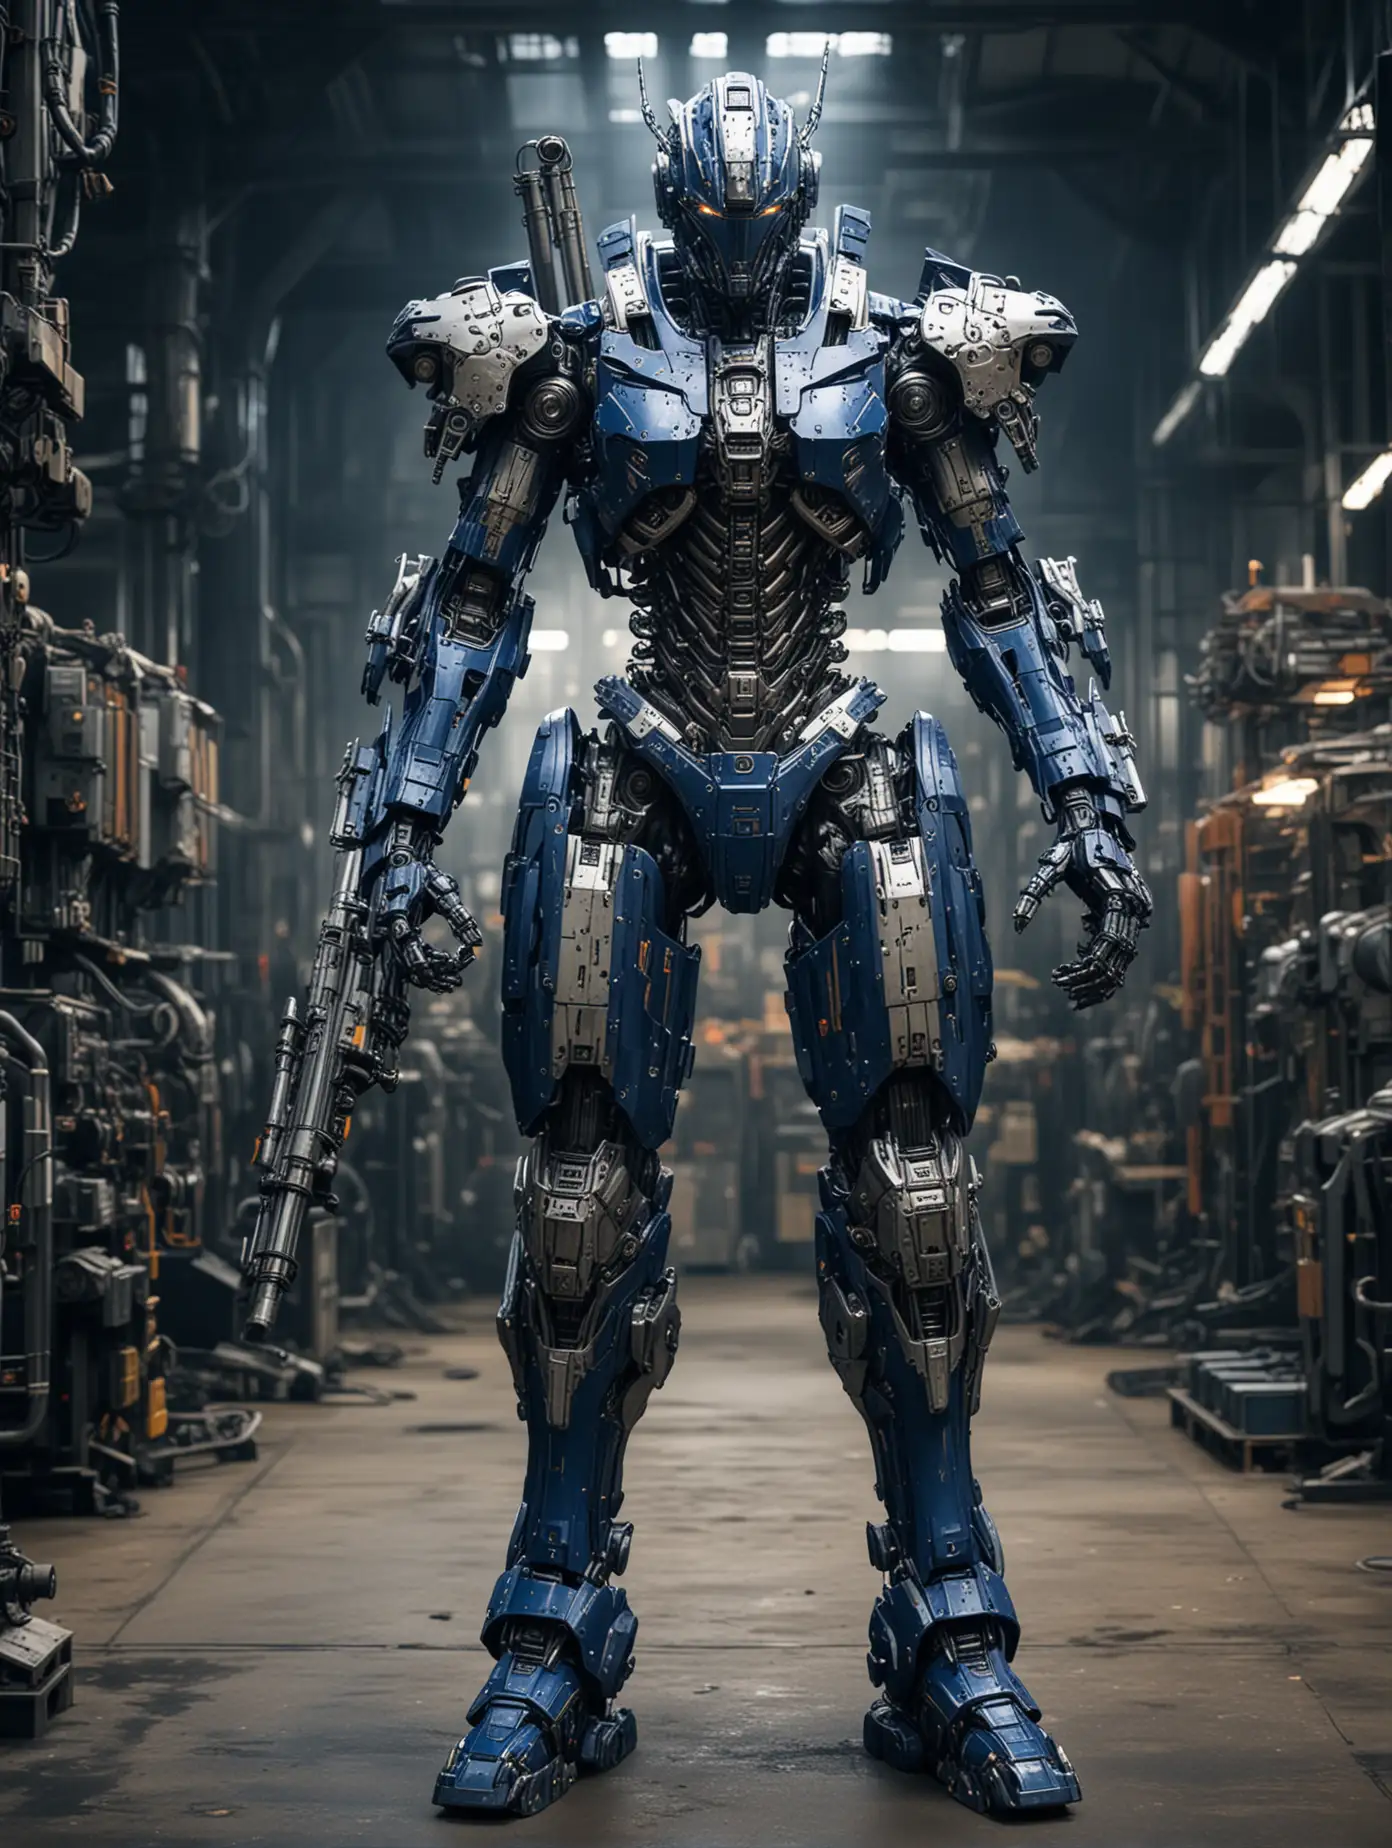 An image of a 10 feet tall mech suit, coloured in dark blue and silver, heavily armed and armoured, chest resembling a ribcage, blades, guns, and small horns, inside a factory, in a detailed cyberpunk like style 